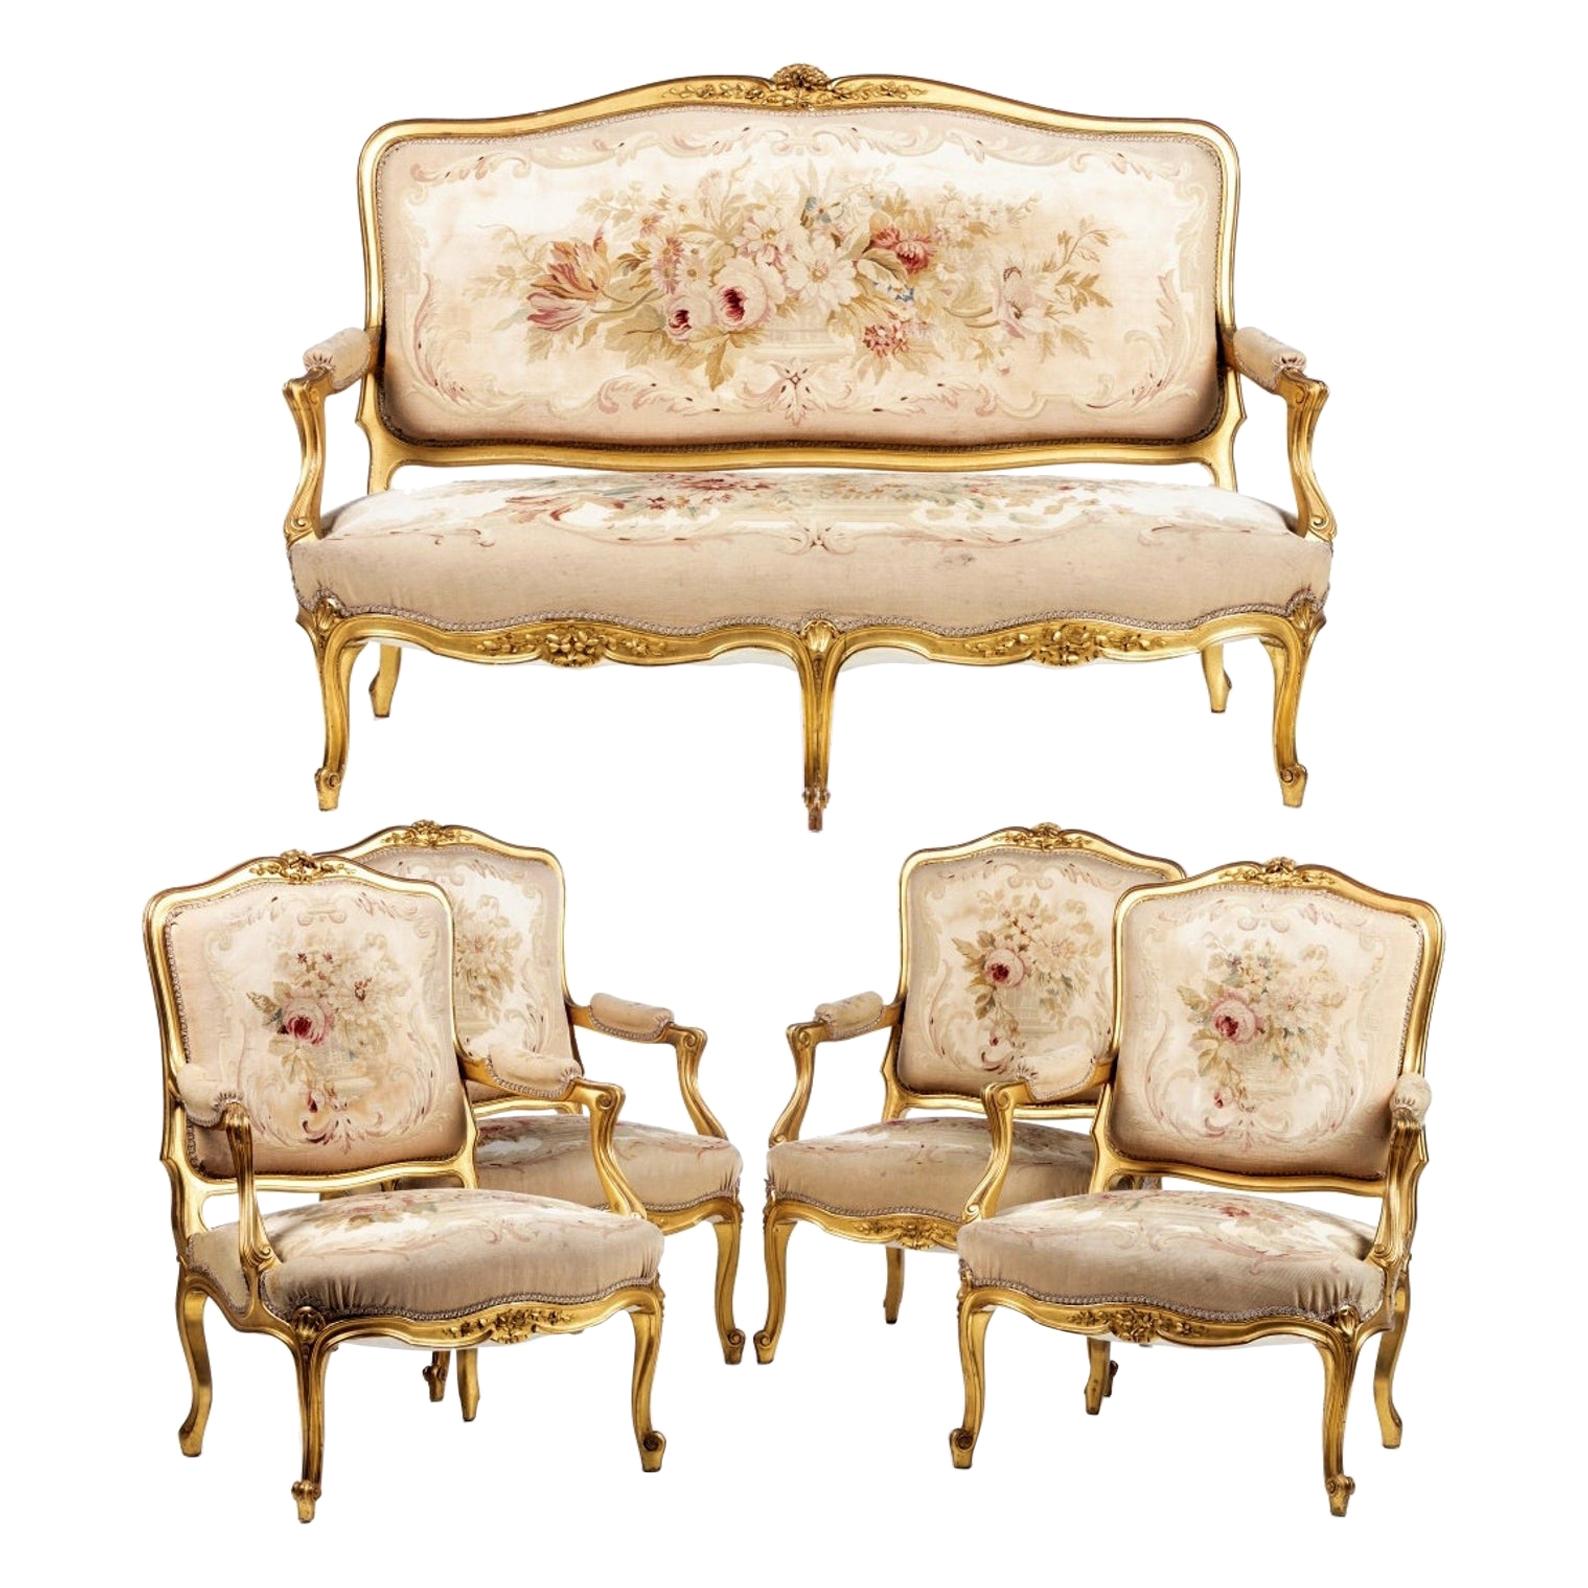 Four Louis XV Armchairs and Sofa 19th Century Aubusson Tapestry